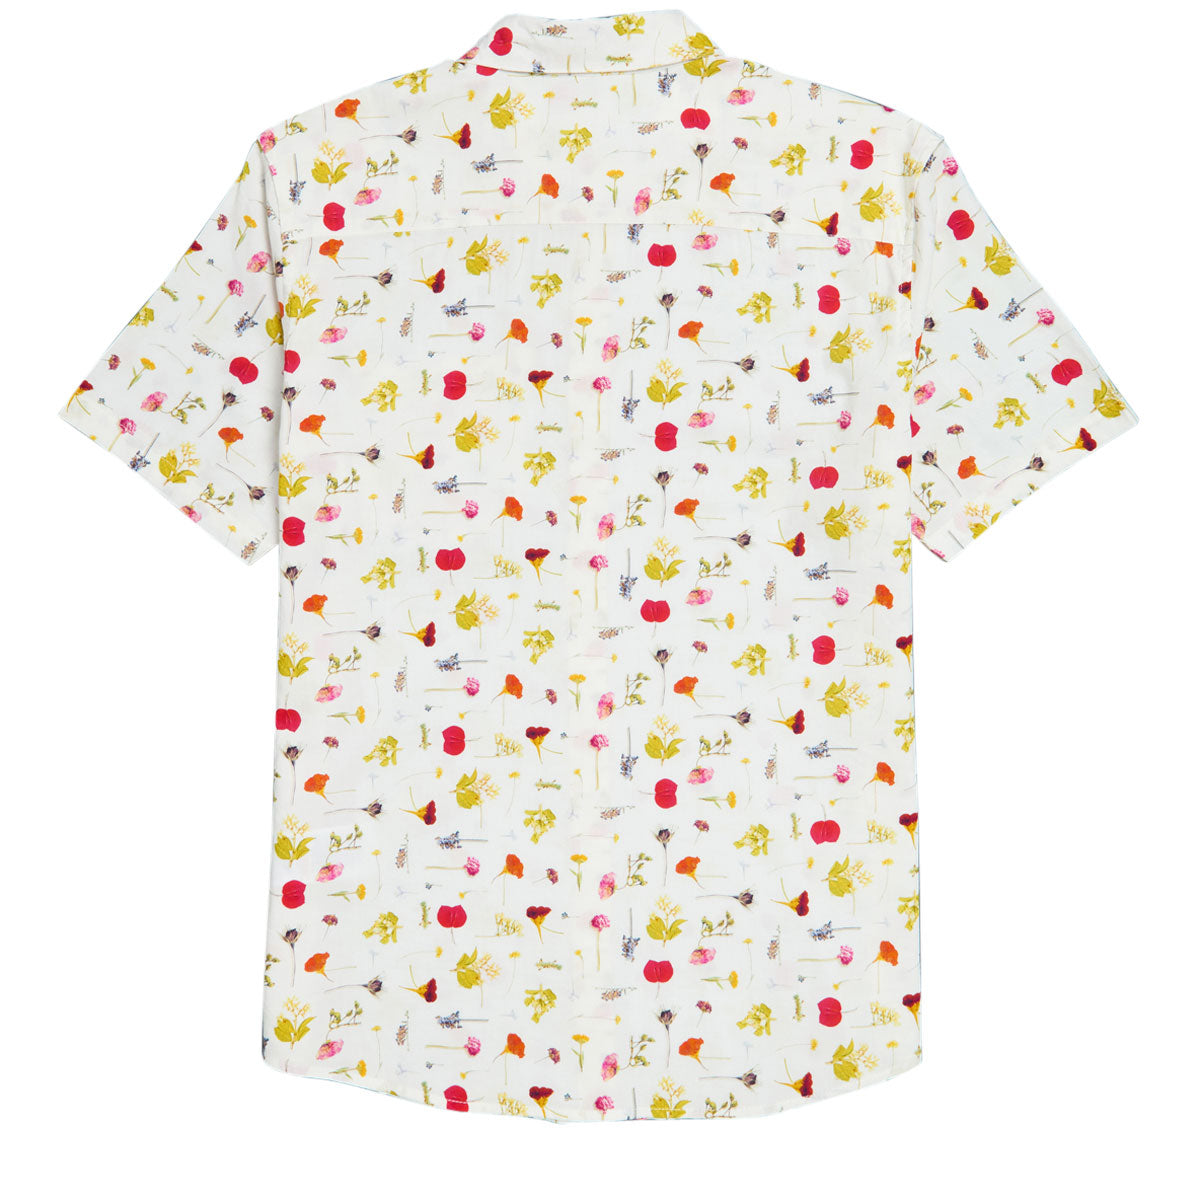 RVCA Oblow Pressed Shirt - White image 2